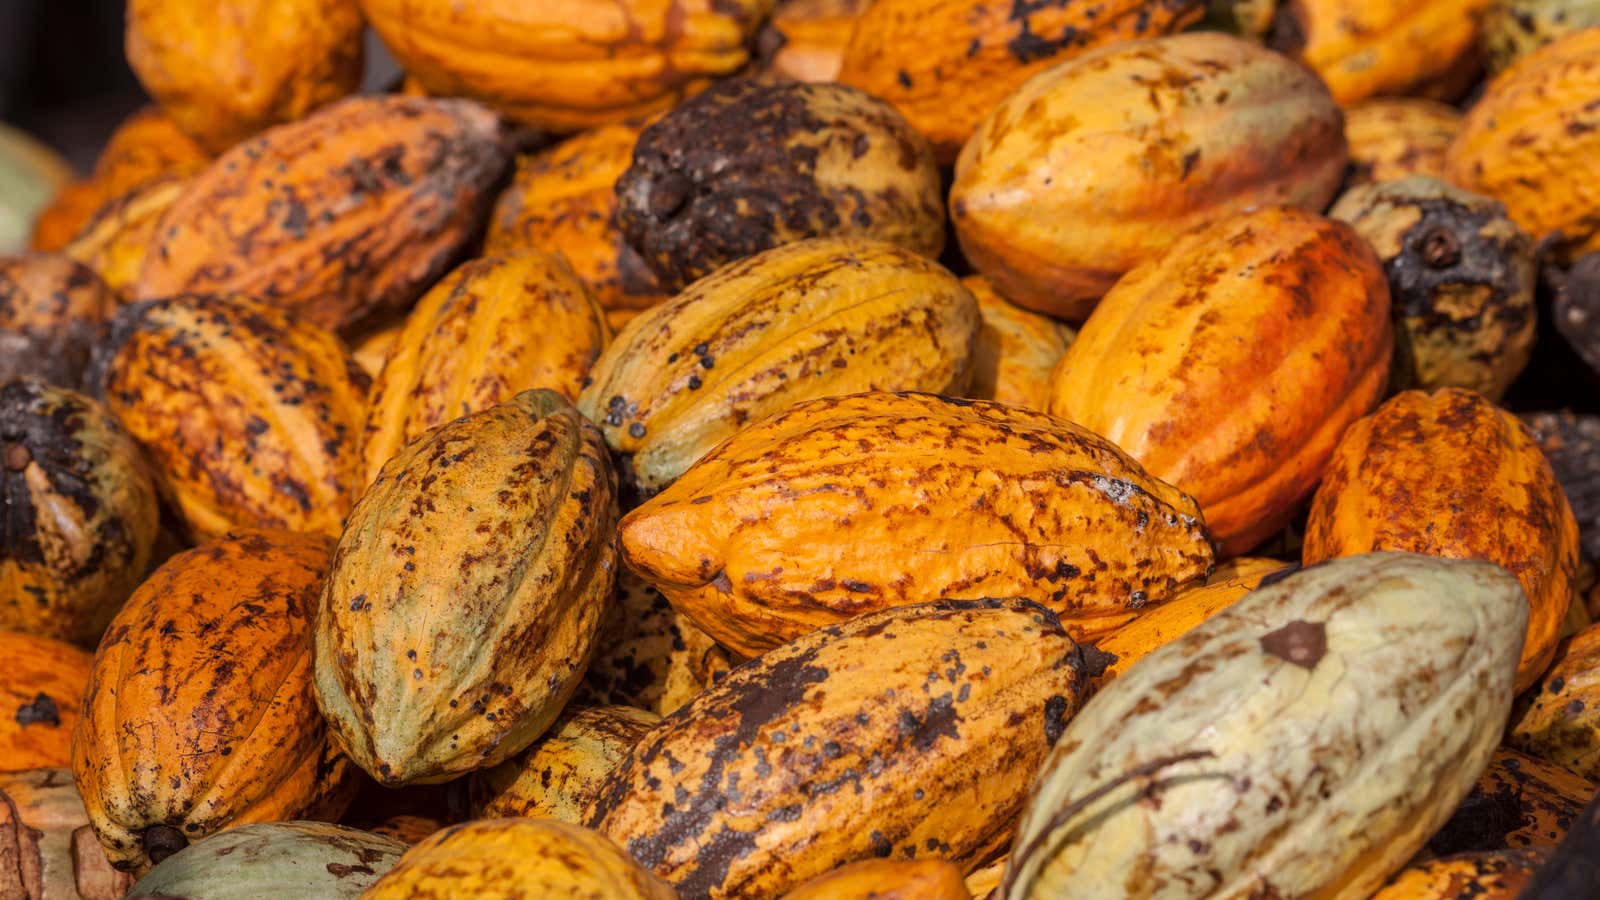 Image for Cocoa's price rally may have finally peaked, financial firm says